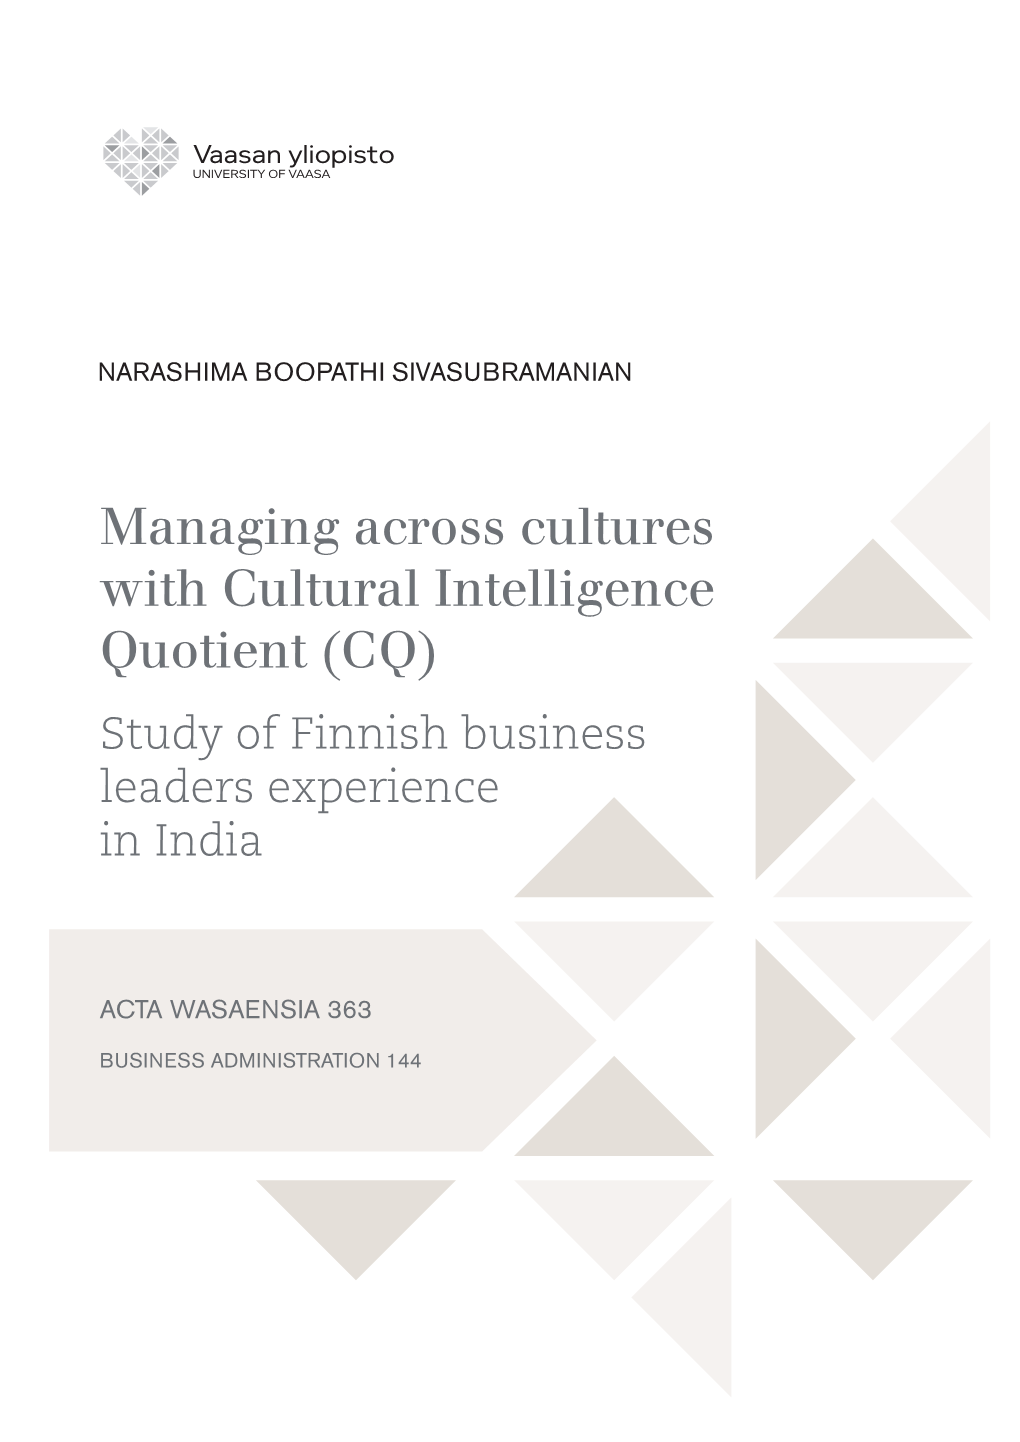 Managing Across Cultures with Cultural Intelligence Quotient (CQ) Study of Finnish Business Leaders Experience in India